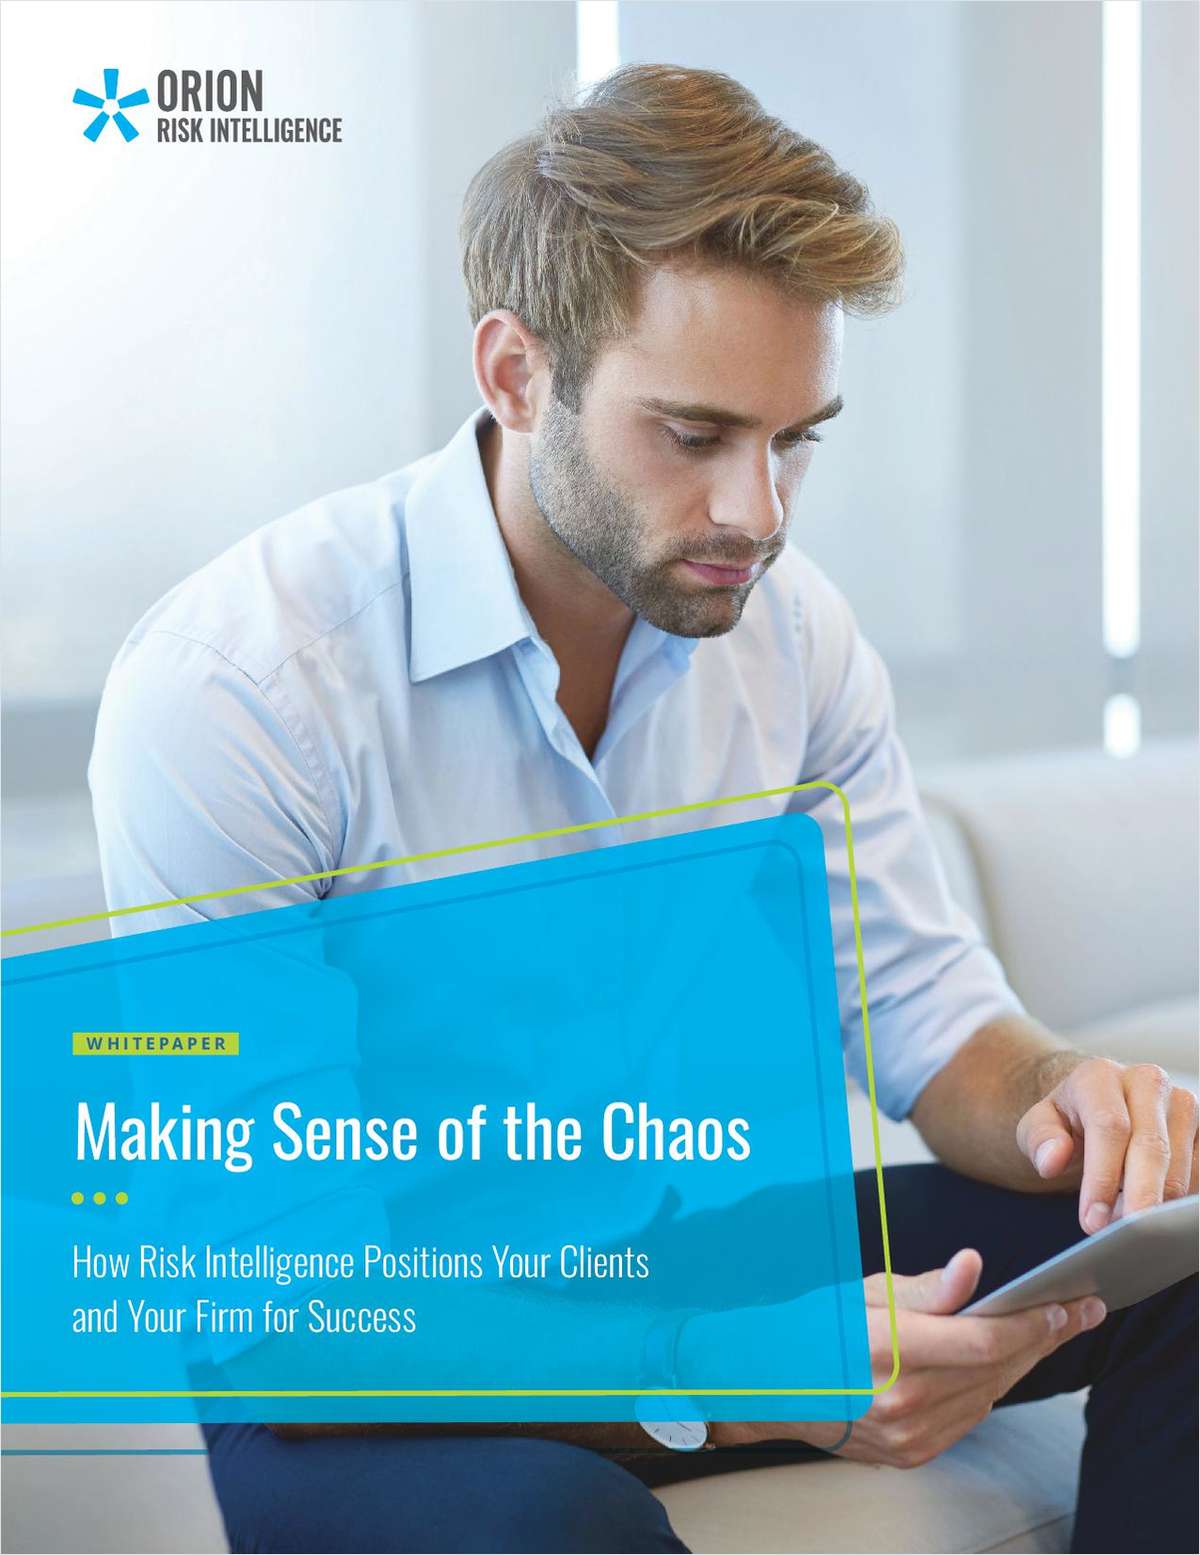 Build Successful Client Interactions with Risk Intelligence